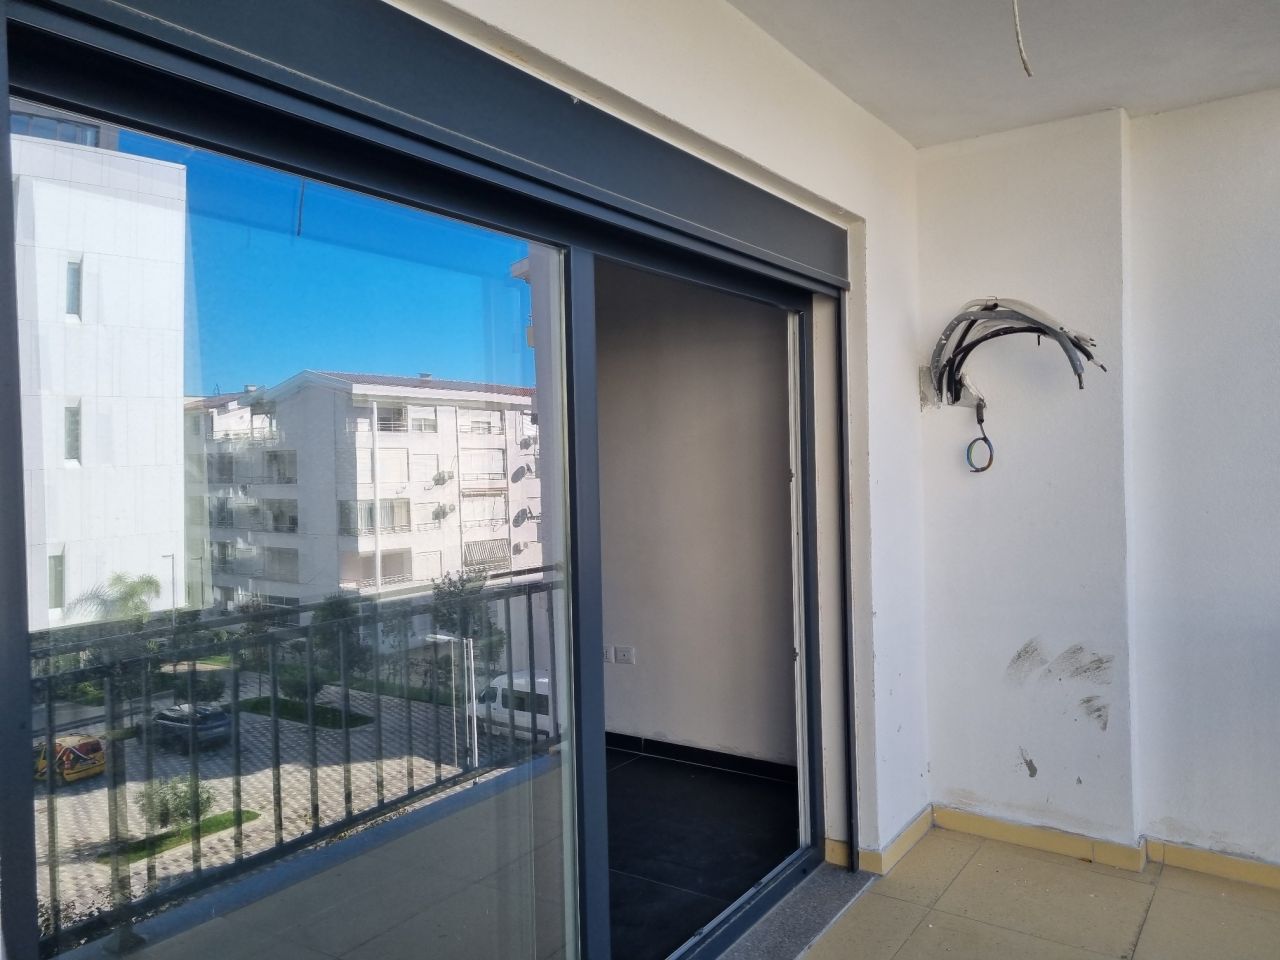 Apartment For Sale In Qerret Durres Albania, Located In A Good Area, Near The Beach